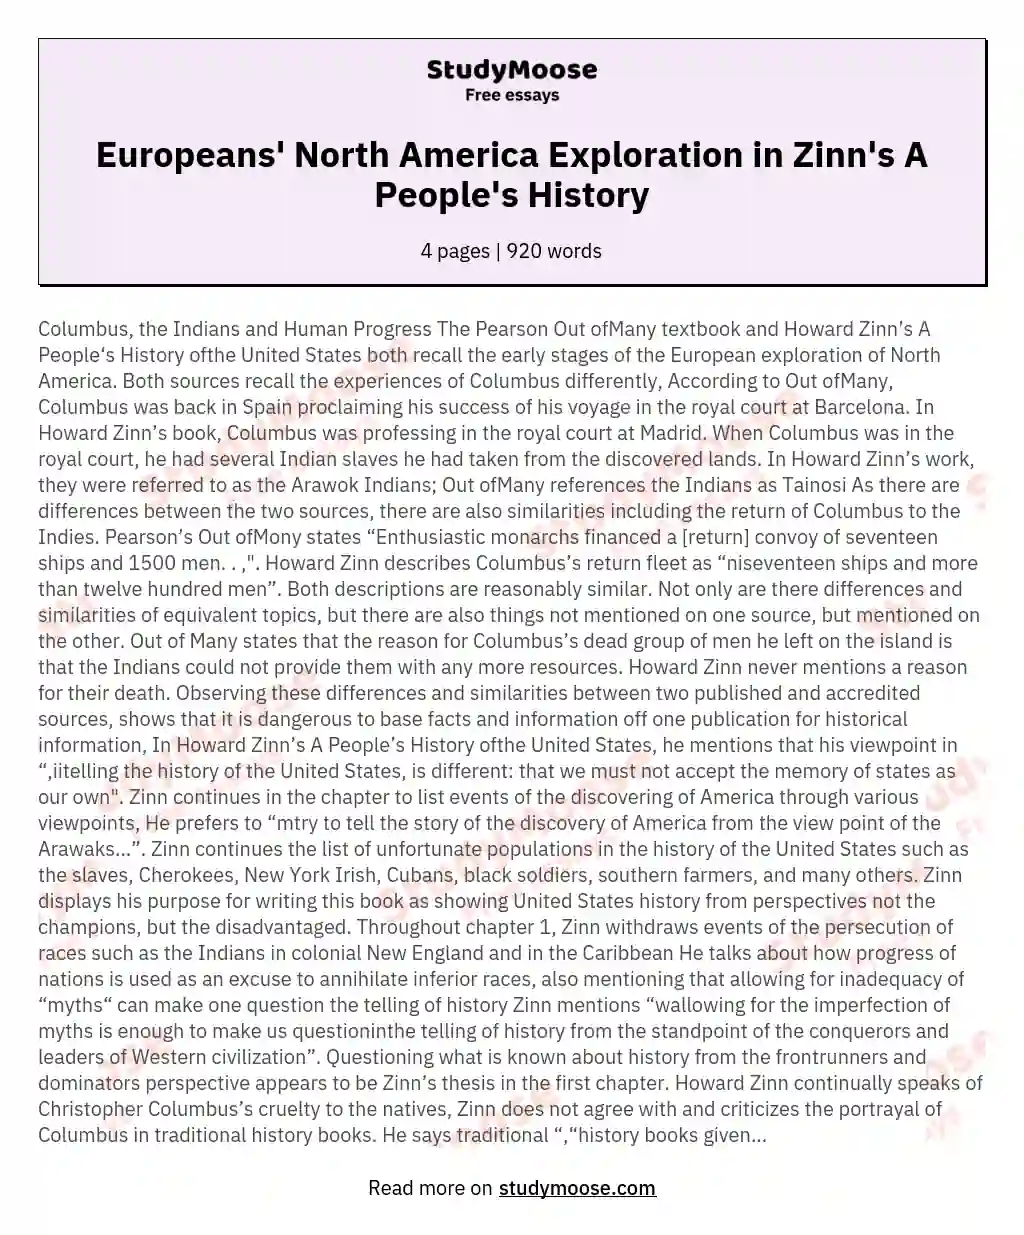 Europeans' North America Exploration in Zinn's A People's History essay